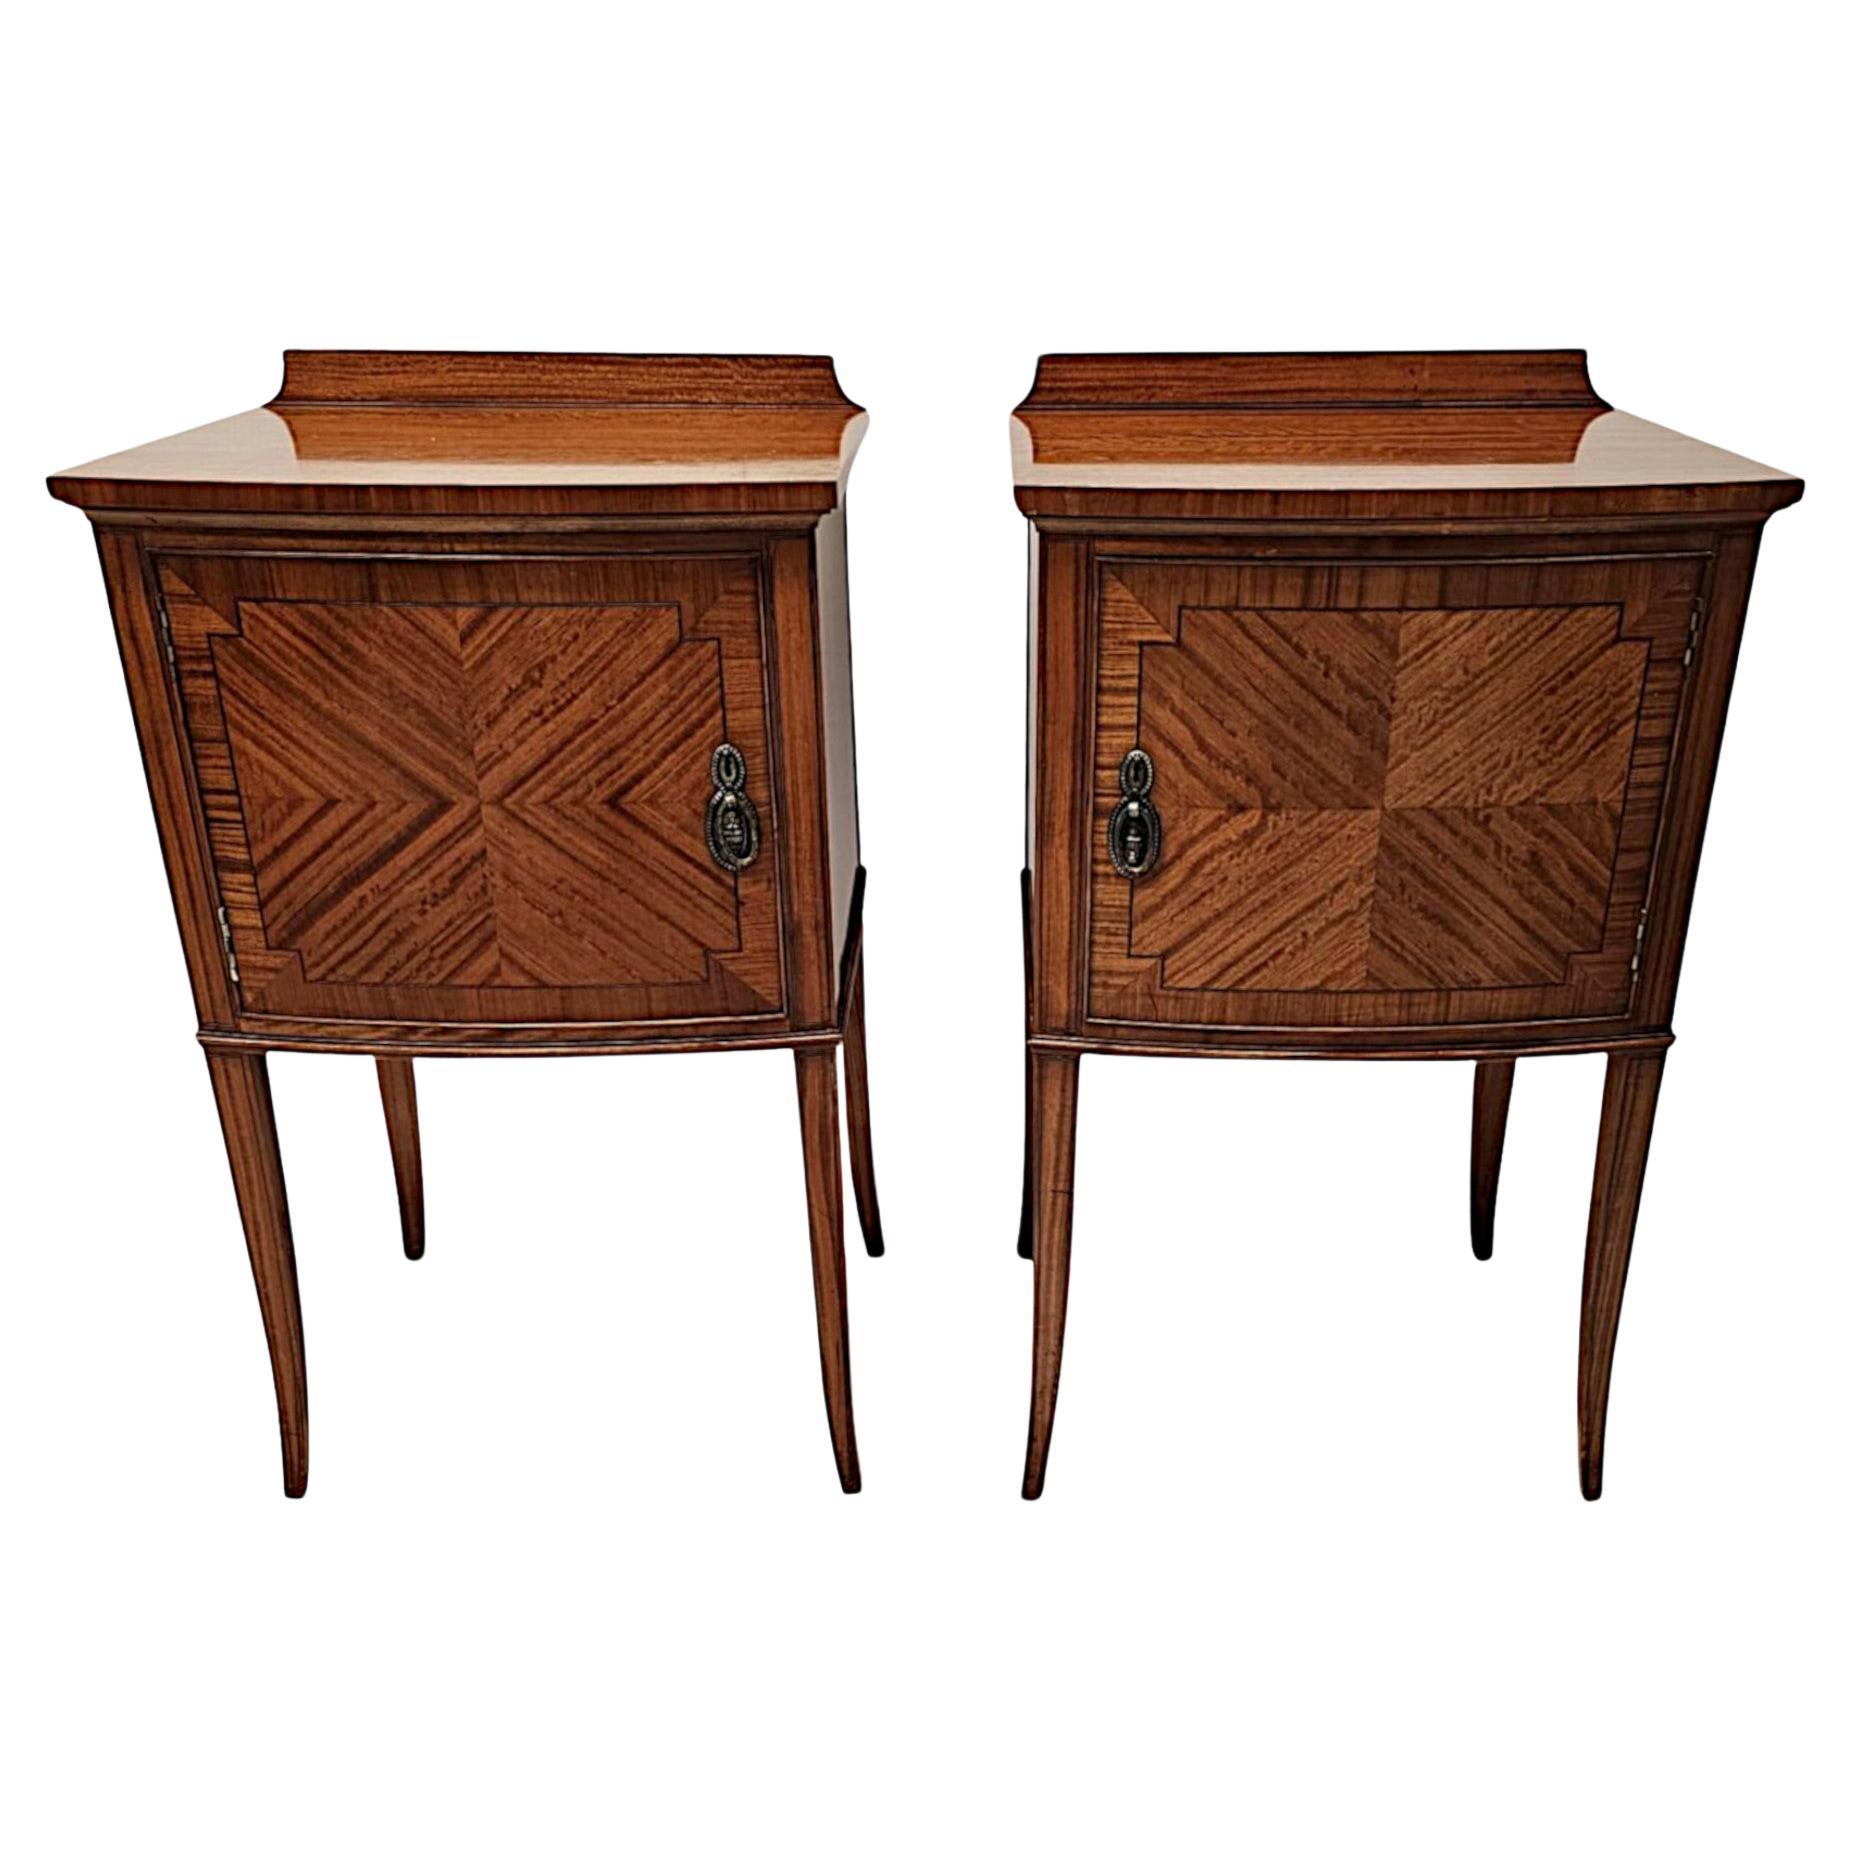 A Fabulous Edwardian Pair of Inlaid Satinwood Bedside Cabinets